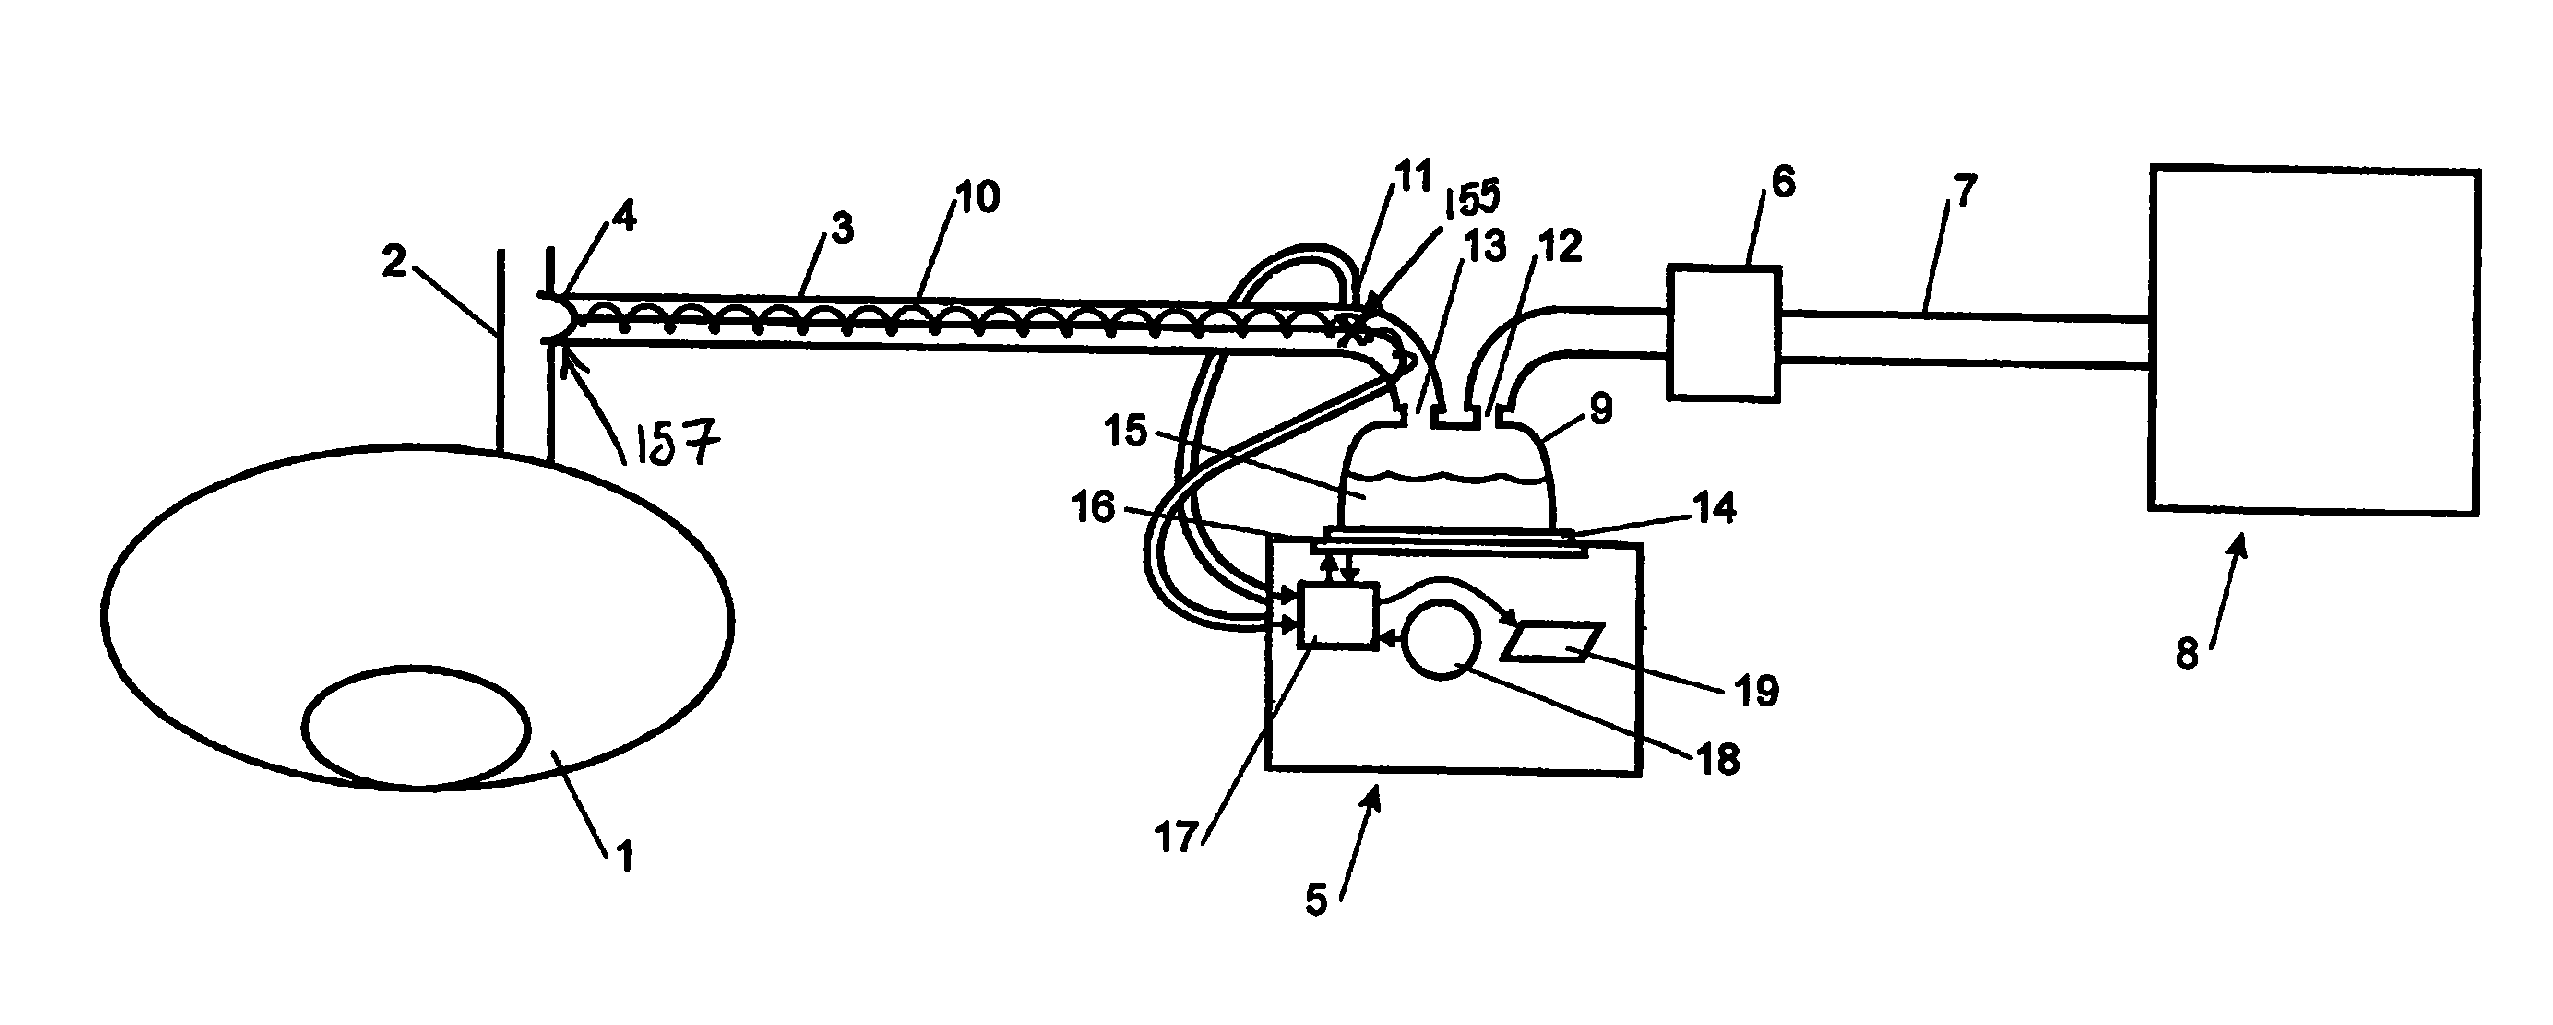 Apparatus used for the humidification of gases in medical procedures